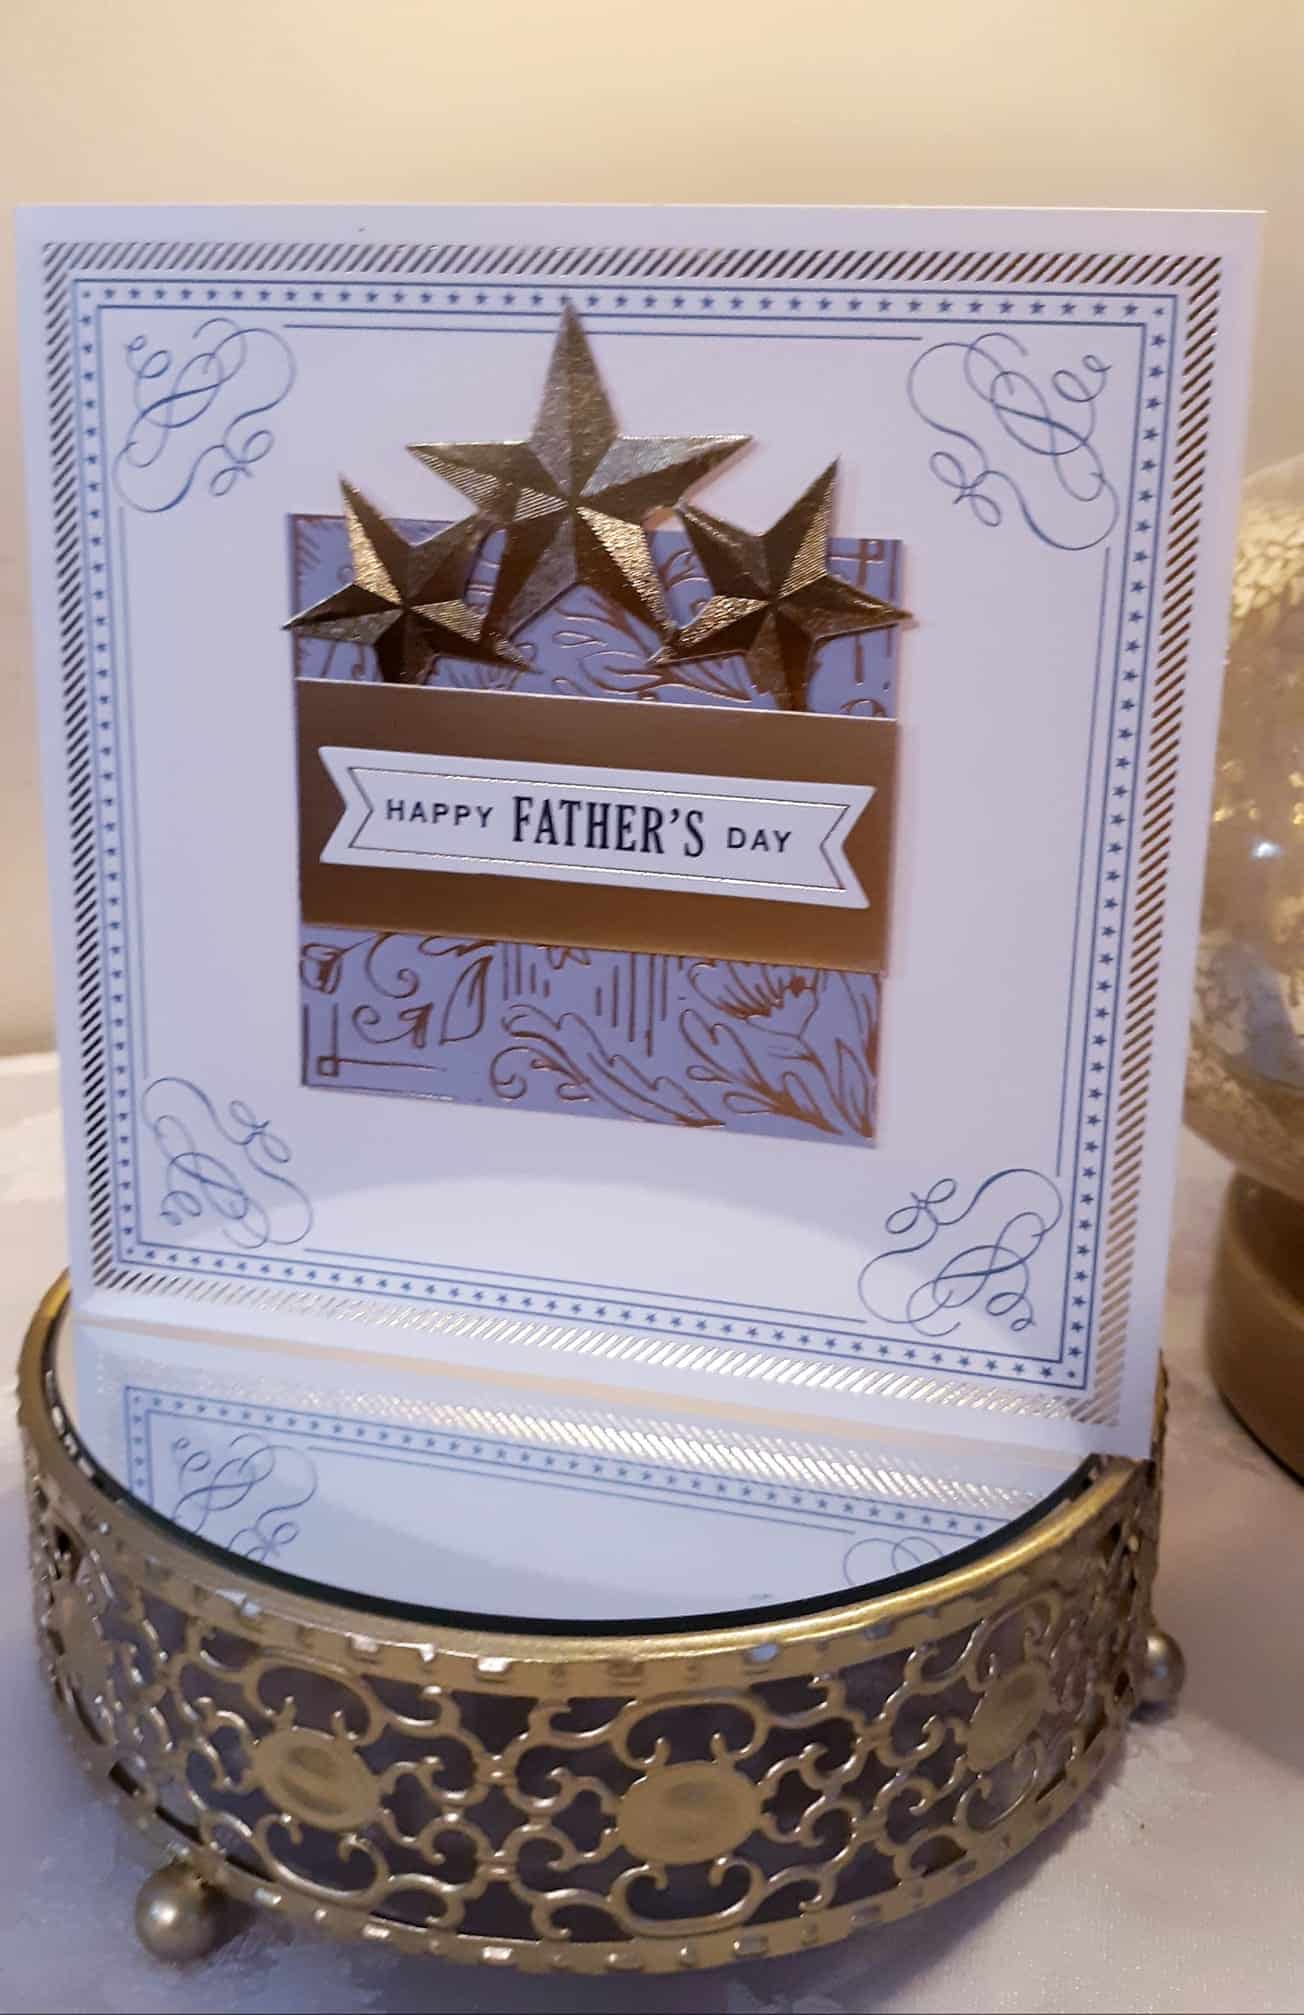 a father's day card on a table.